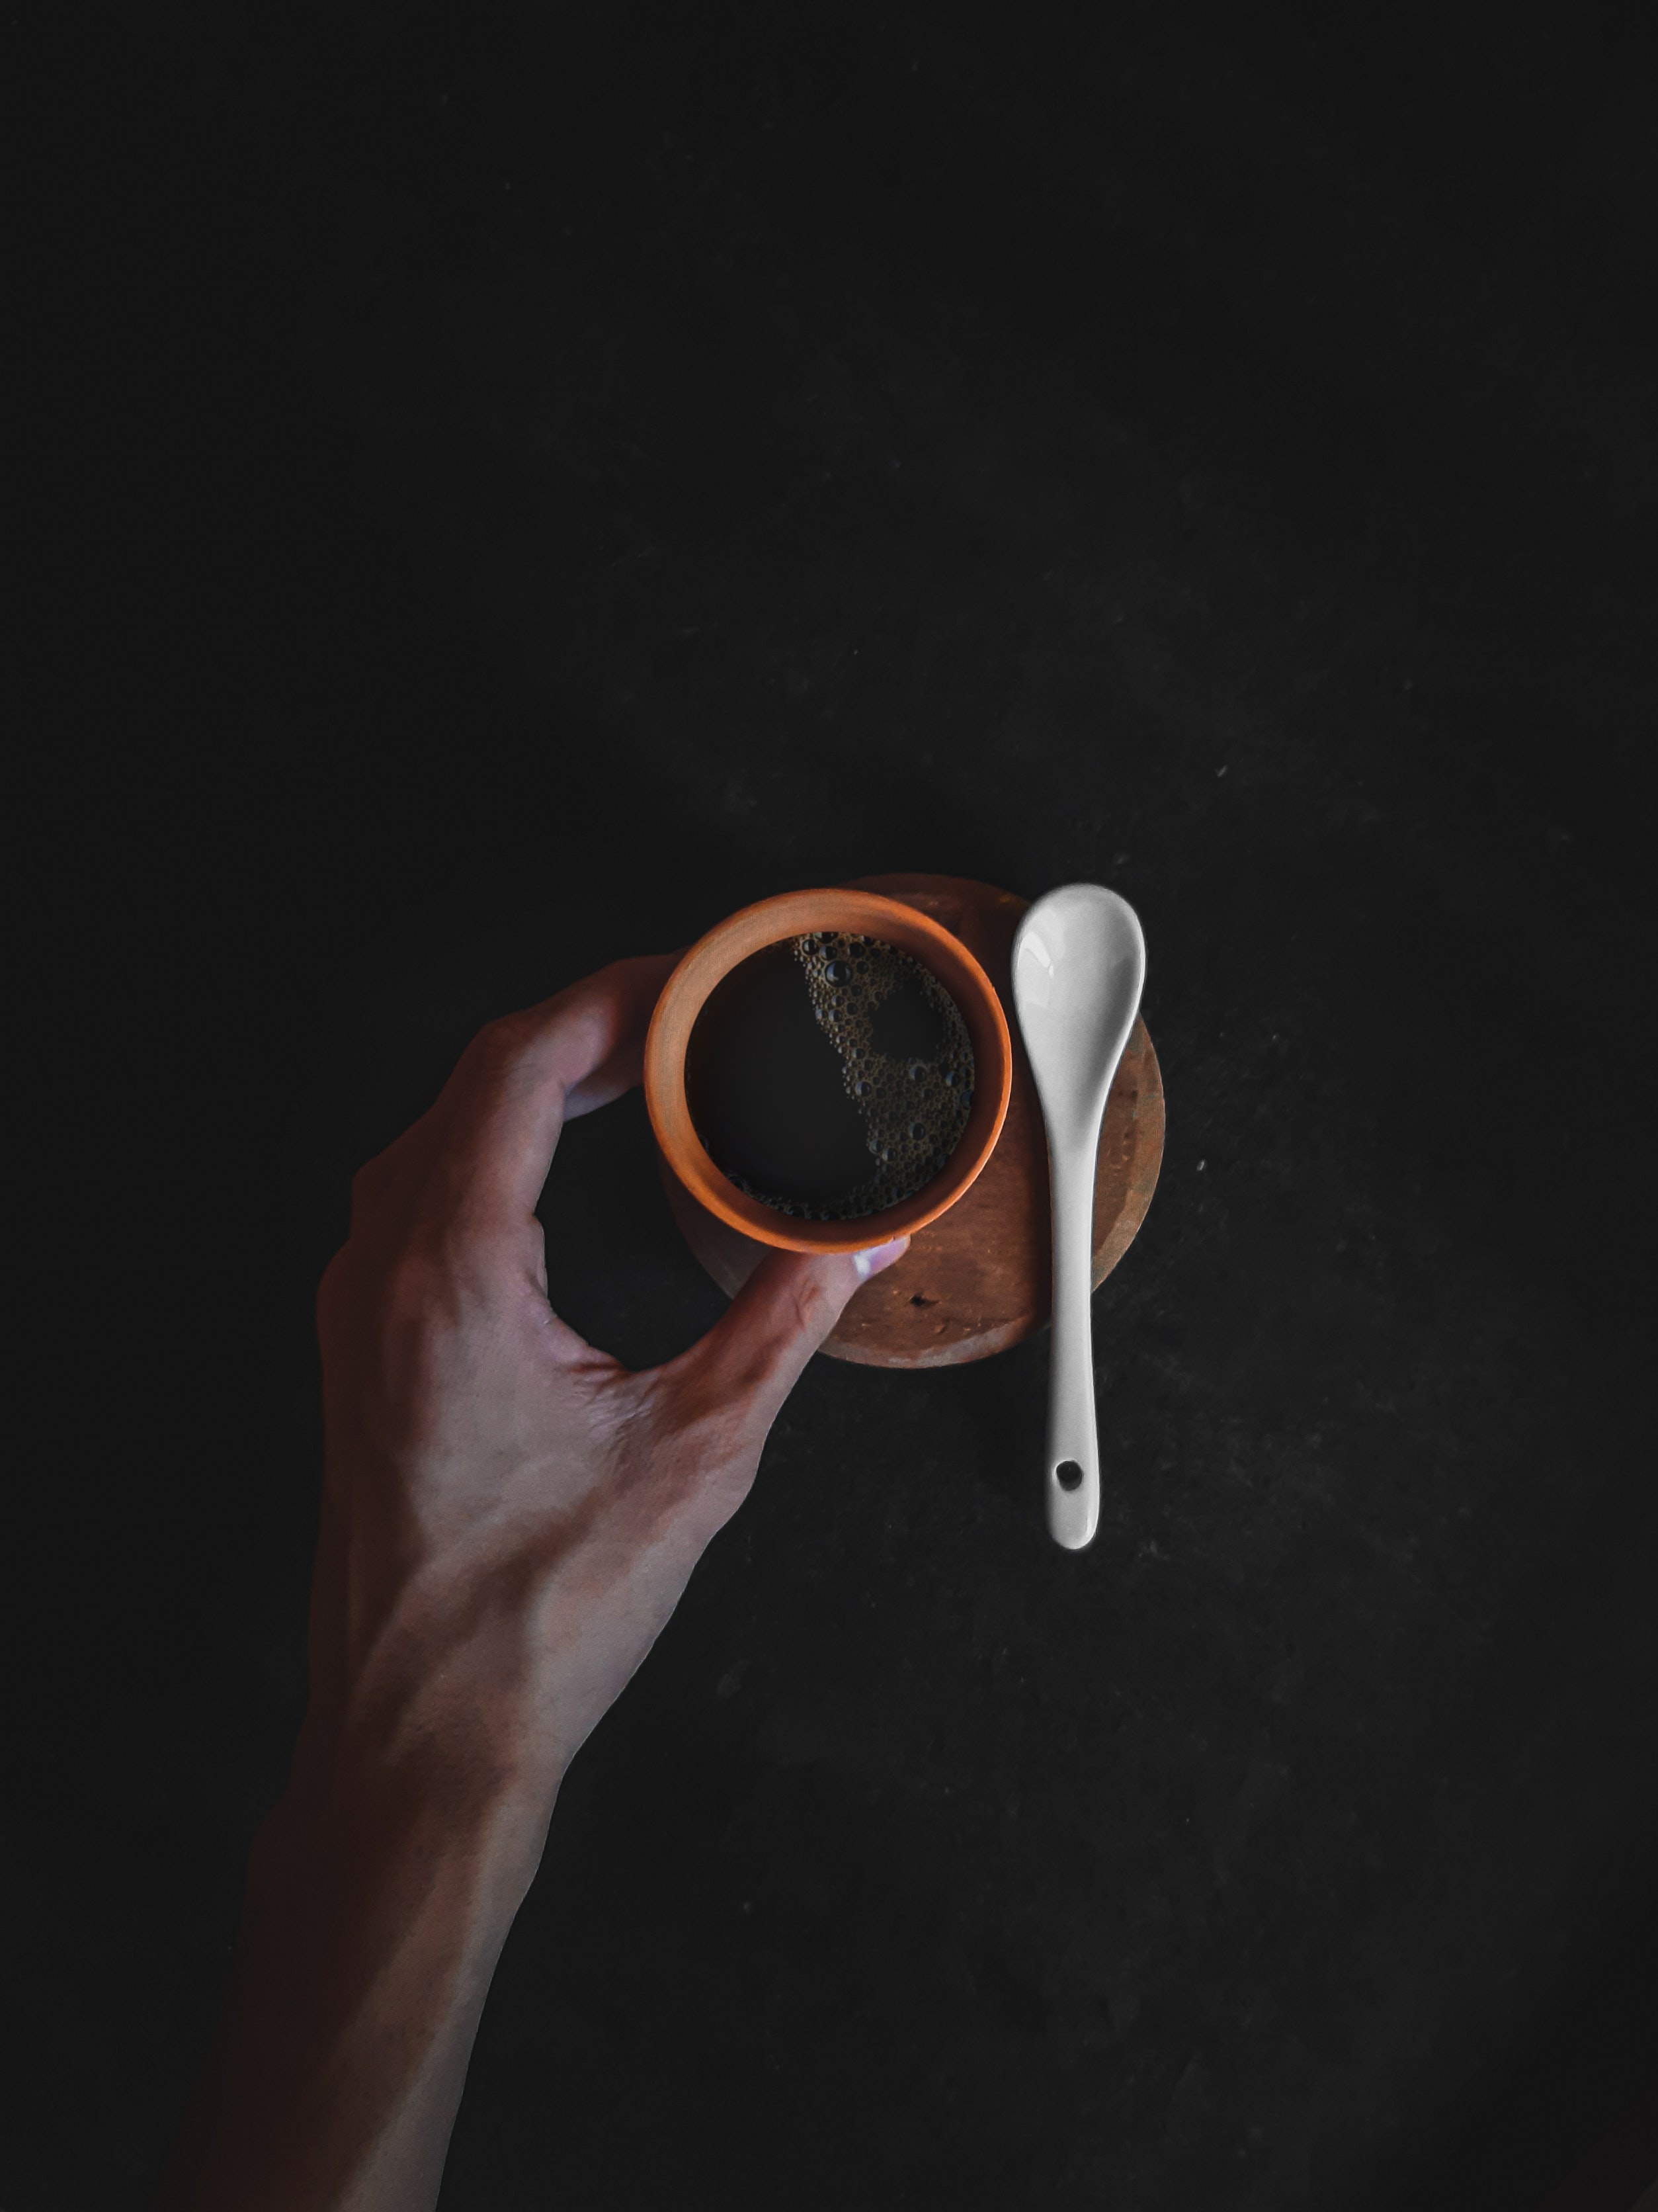 android coffee, food, dark, hand, cup, spoon